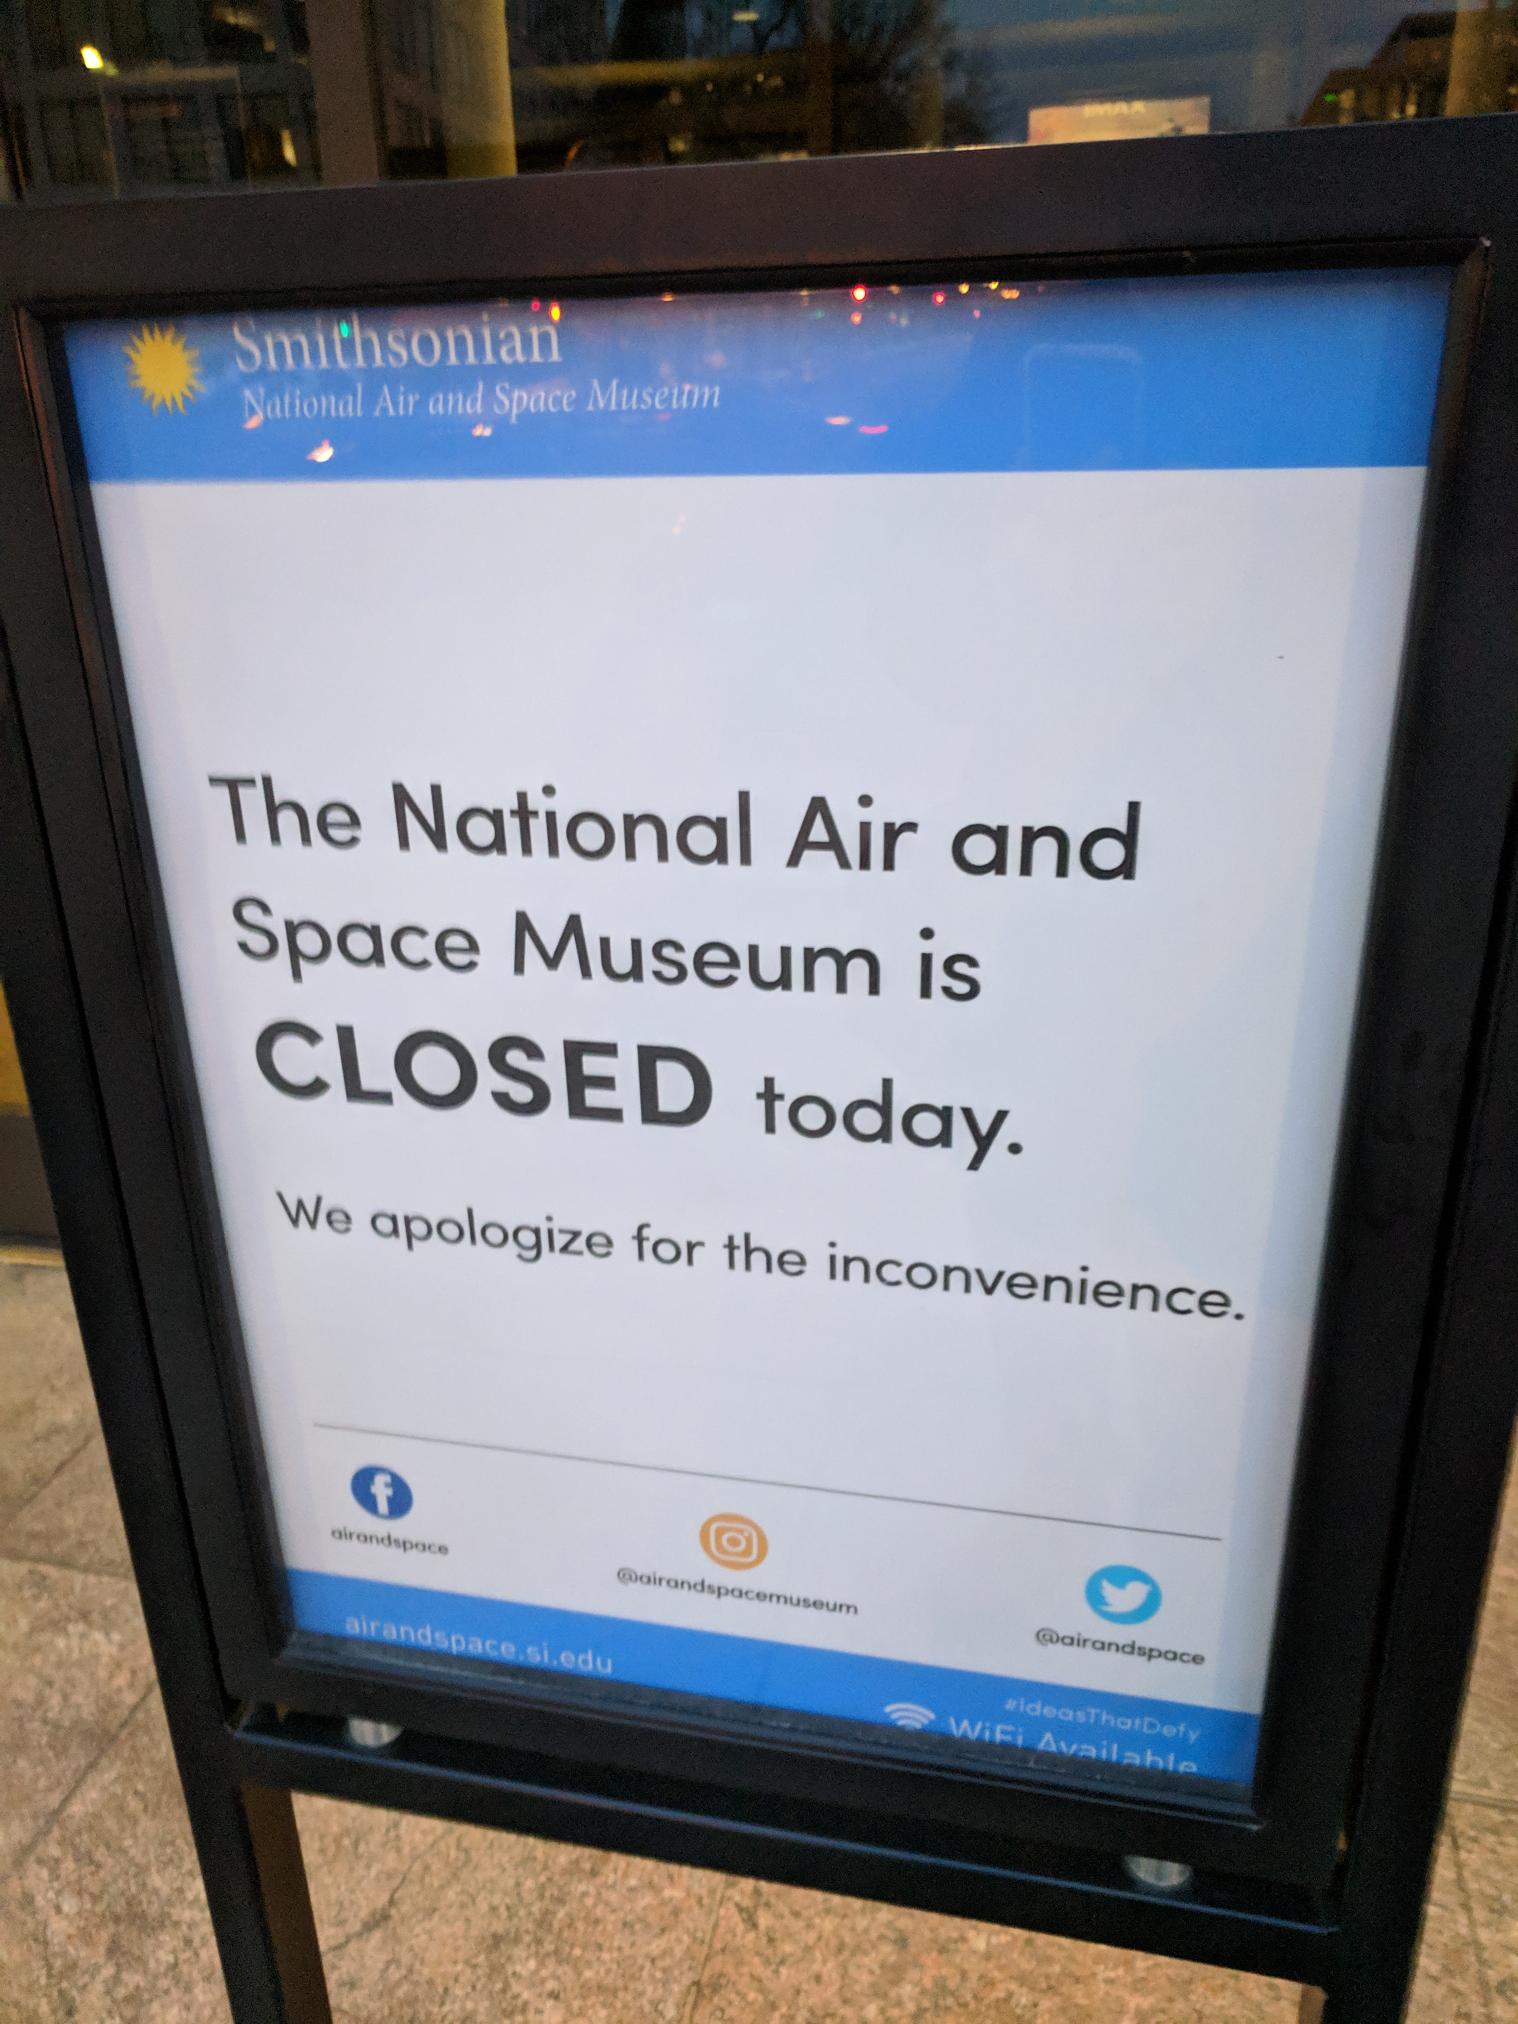 Picture from sign posted at the Smithsonian National Air and Space Museum. The signs read "The National Air and Space Museum is Closed today."